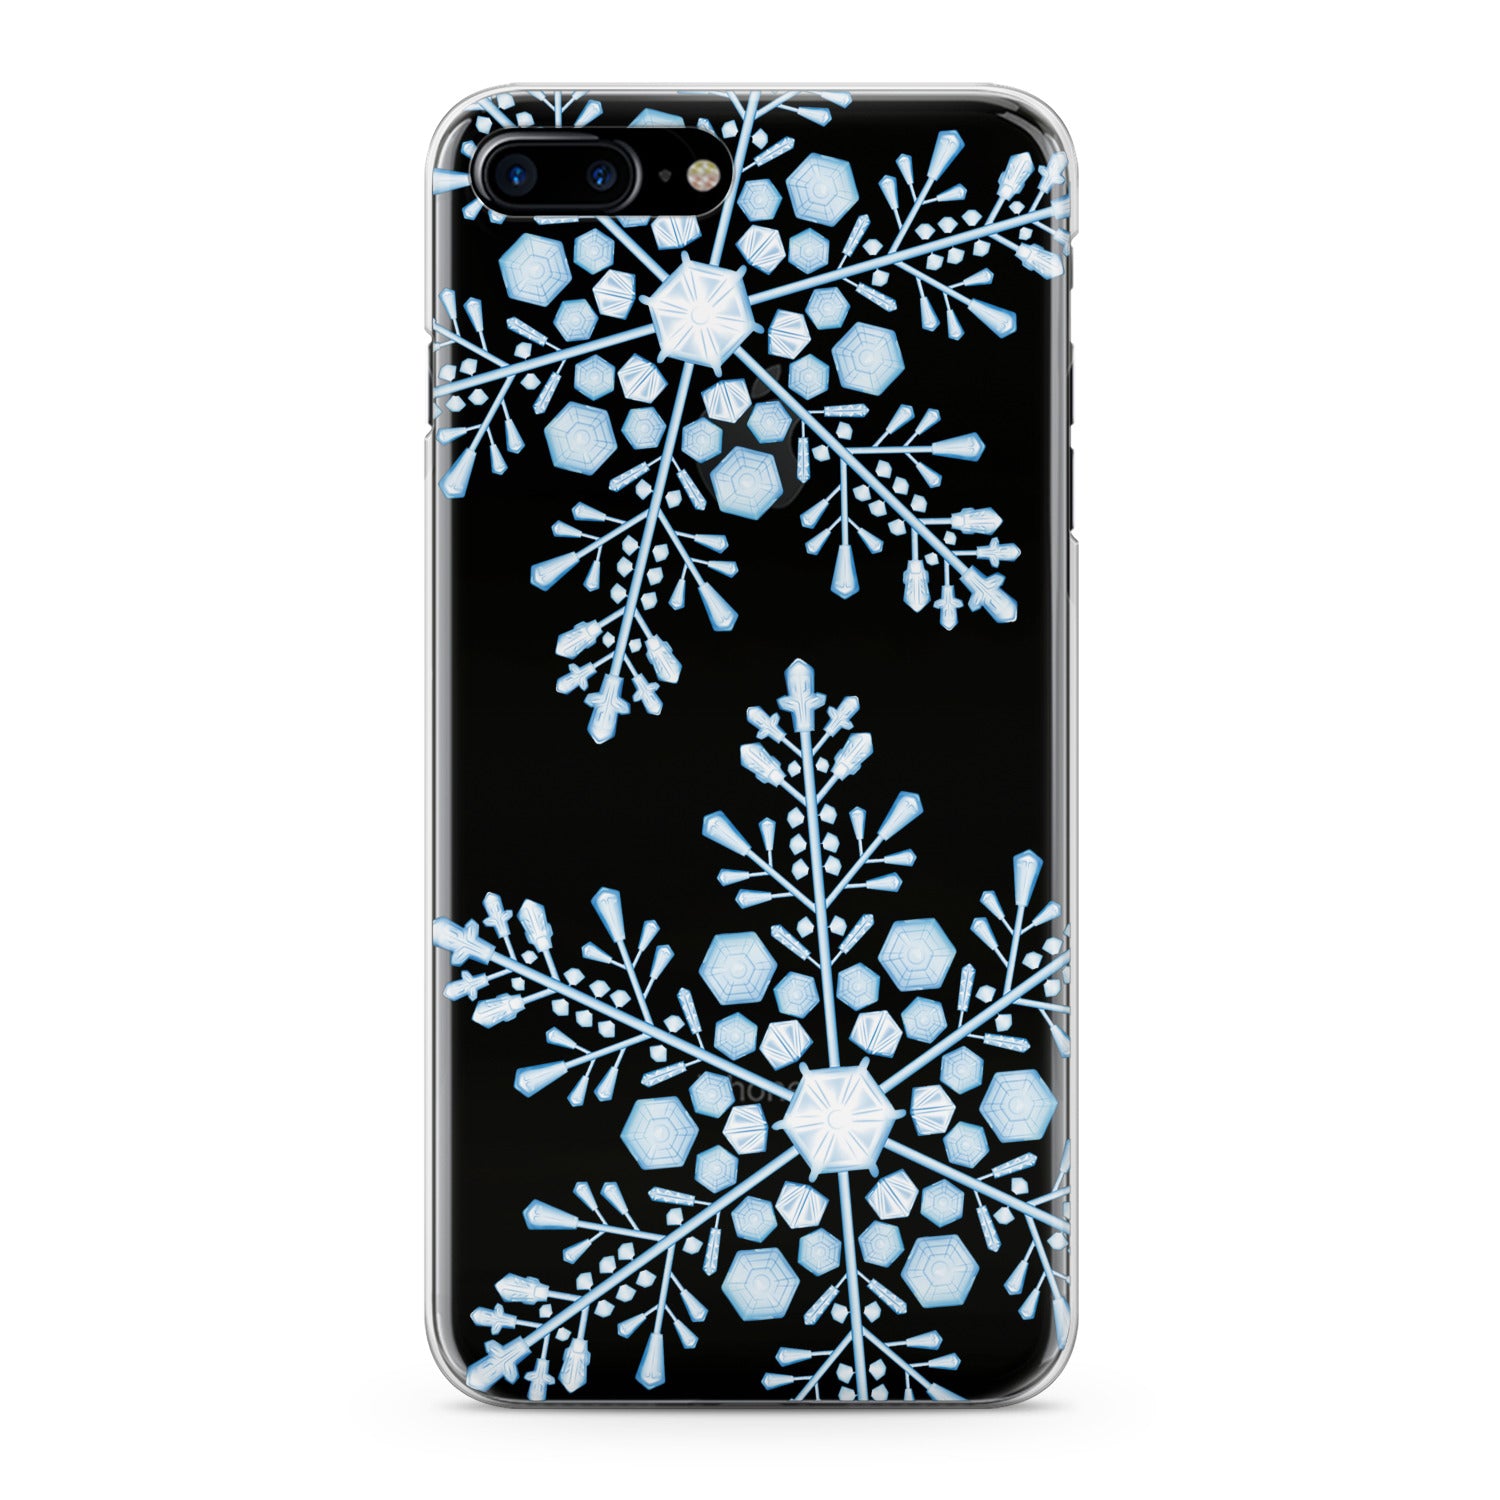 Lex Altern Amazing Snowflake Phone Case for your iPhone & Android phone.